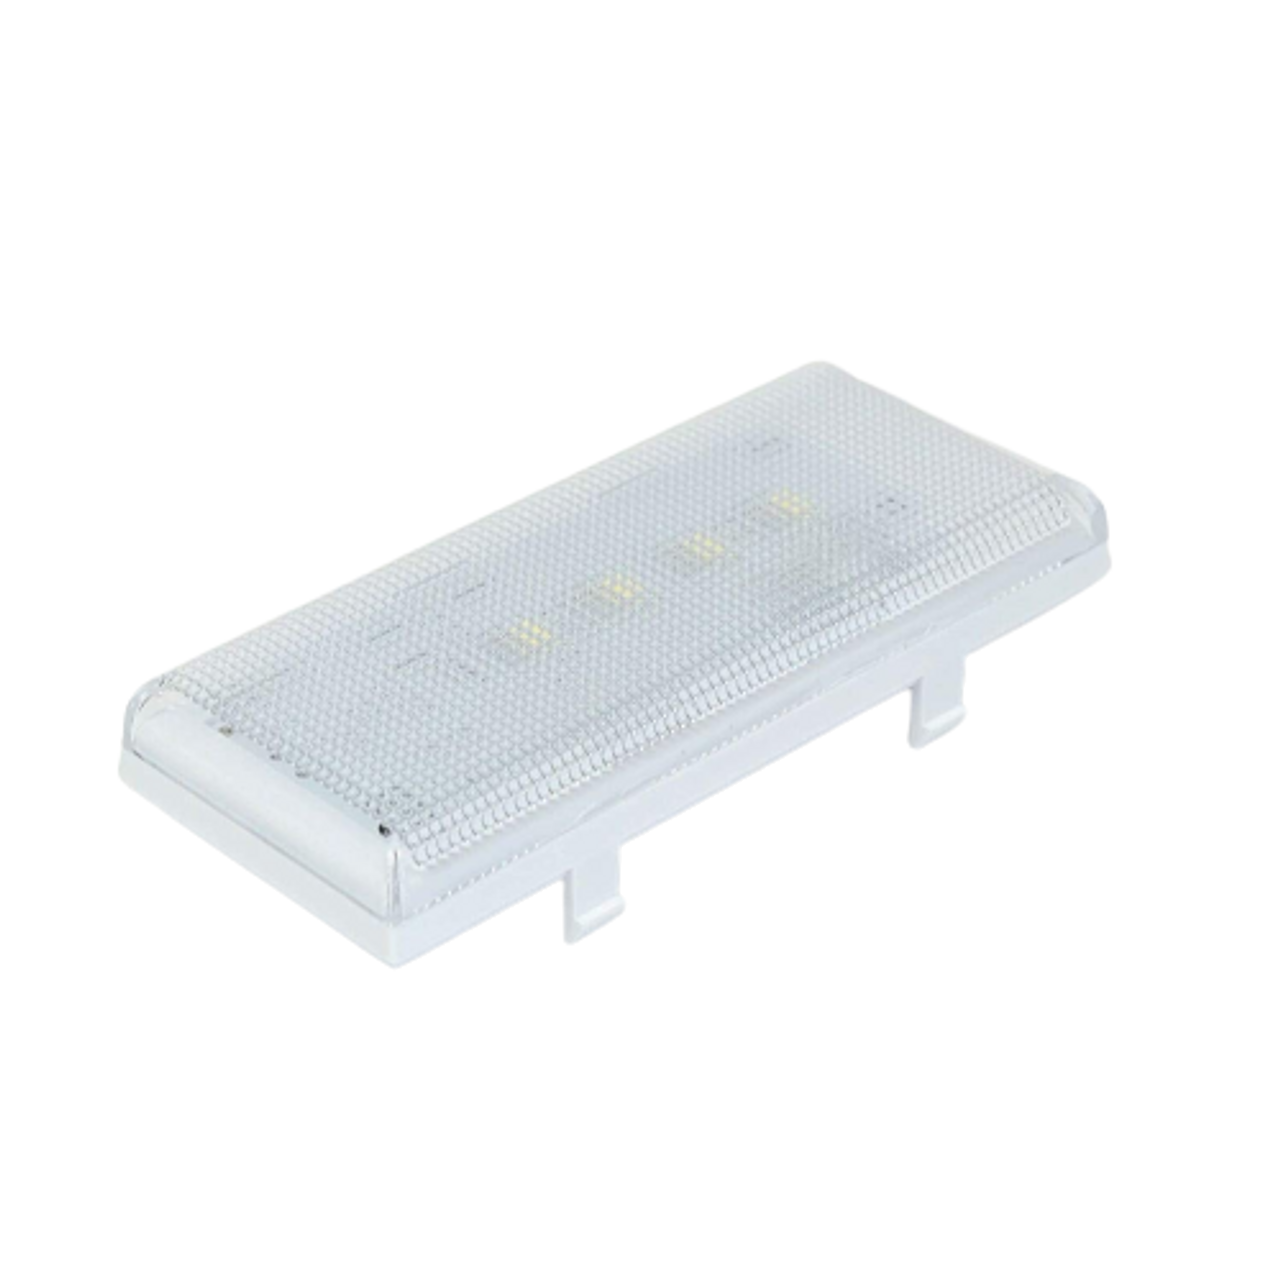 W11104452 LED Light Module Assembly with Case for Whirlpool, Kenmore or Maytag Washers 849_MFN